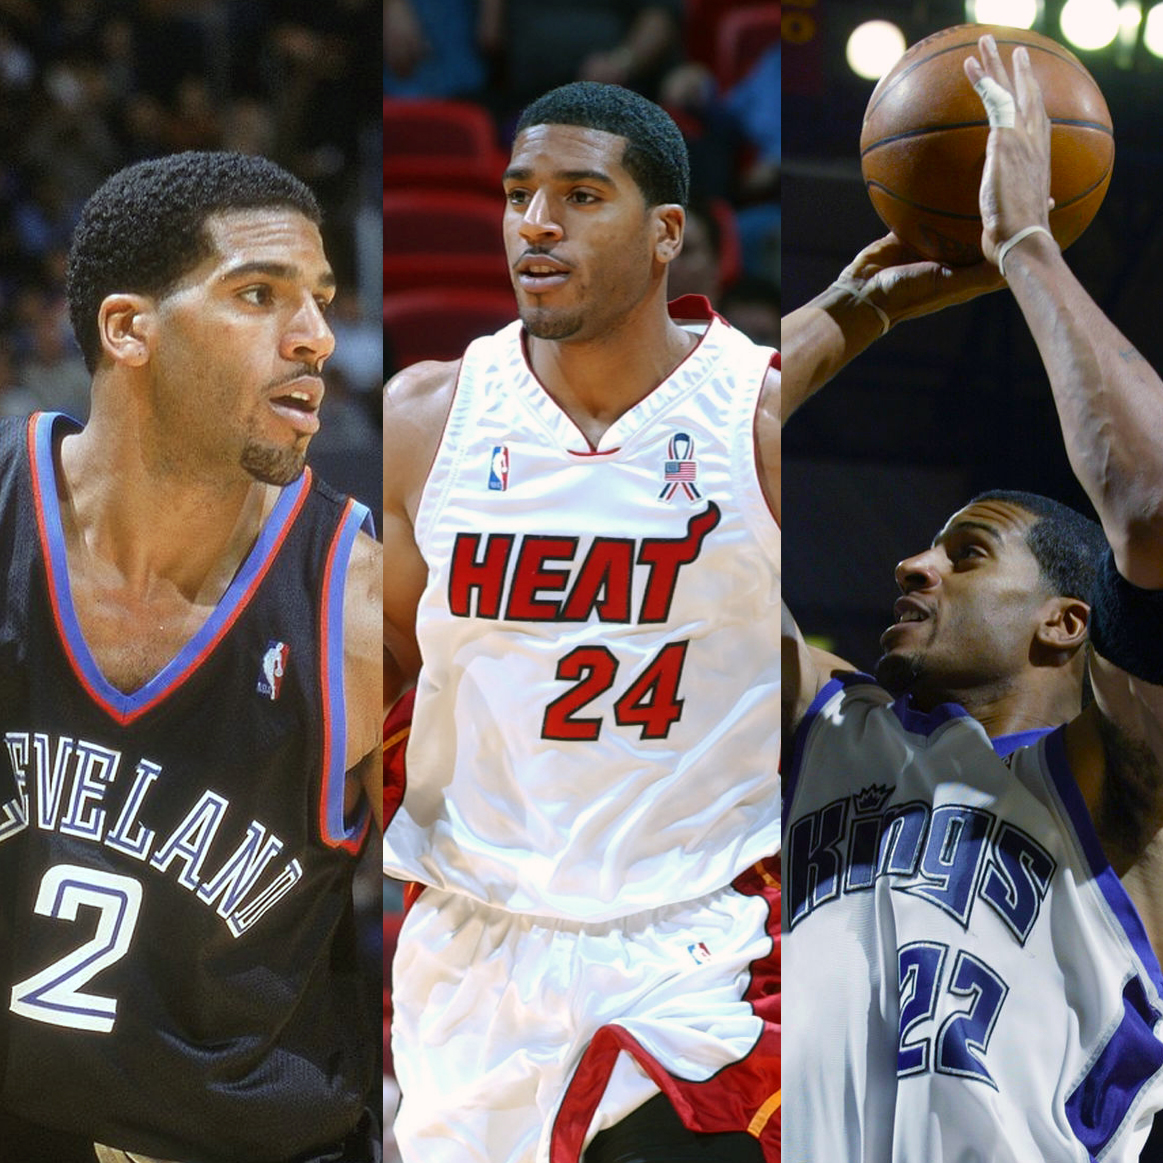 Jim Jackson is one of four players to have played for 12 NBA teams in his career (the others are Joe Smith, Tony Massenburg & Chucky Brown). In his 14-year career, Jackson played for the:MavericksNets76ersWarriorsTrail BlazersHawksCavaliersHeatKingsRocketsSunsLakers